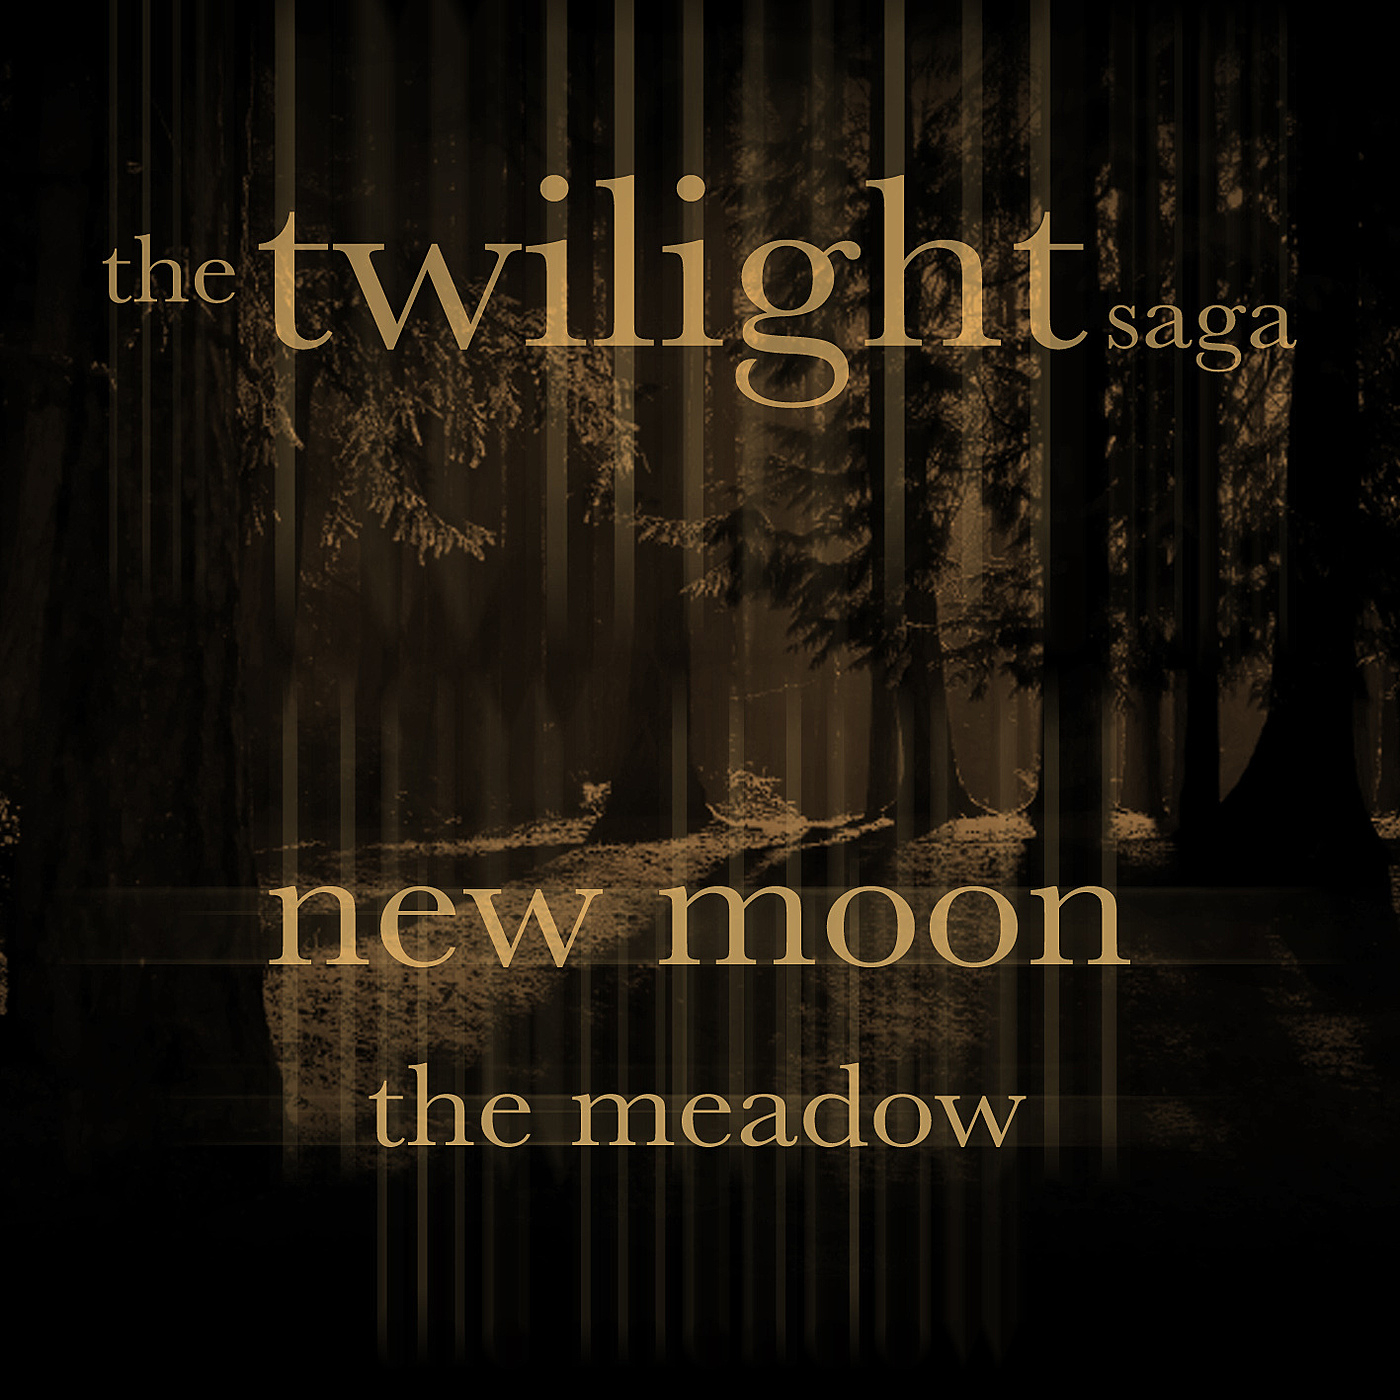 The Meadow (From "Twilight: New Moon")